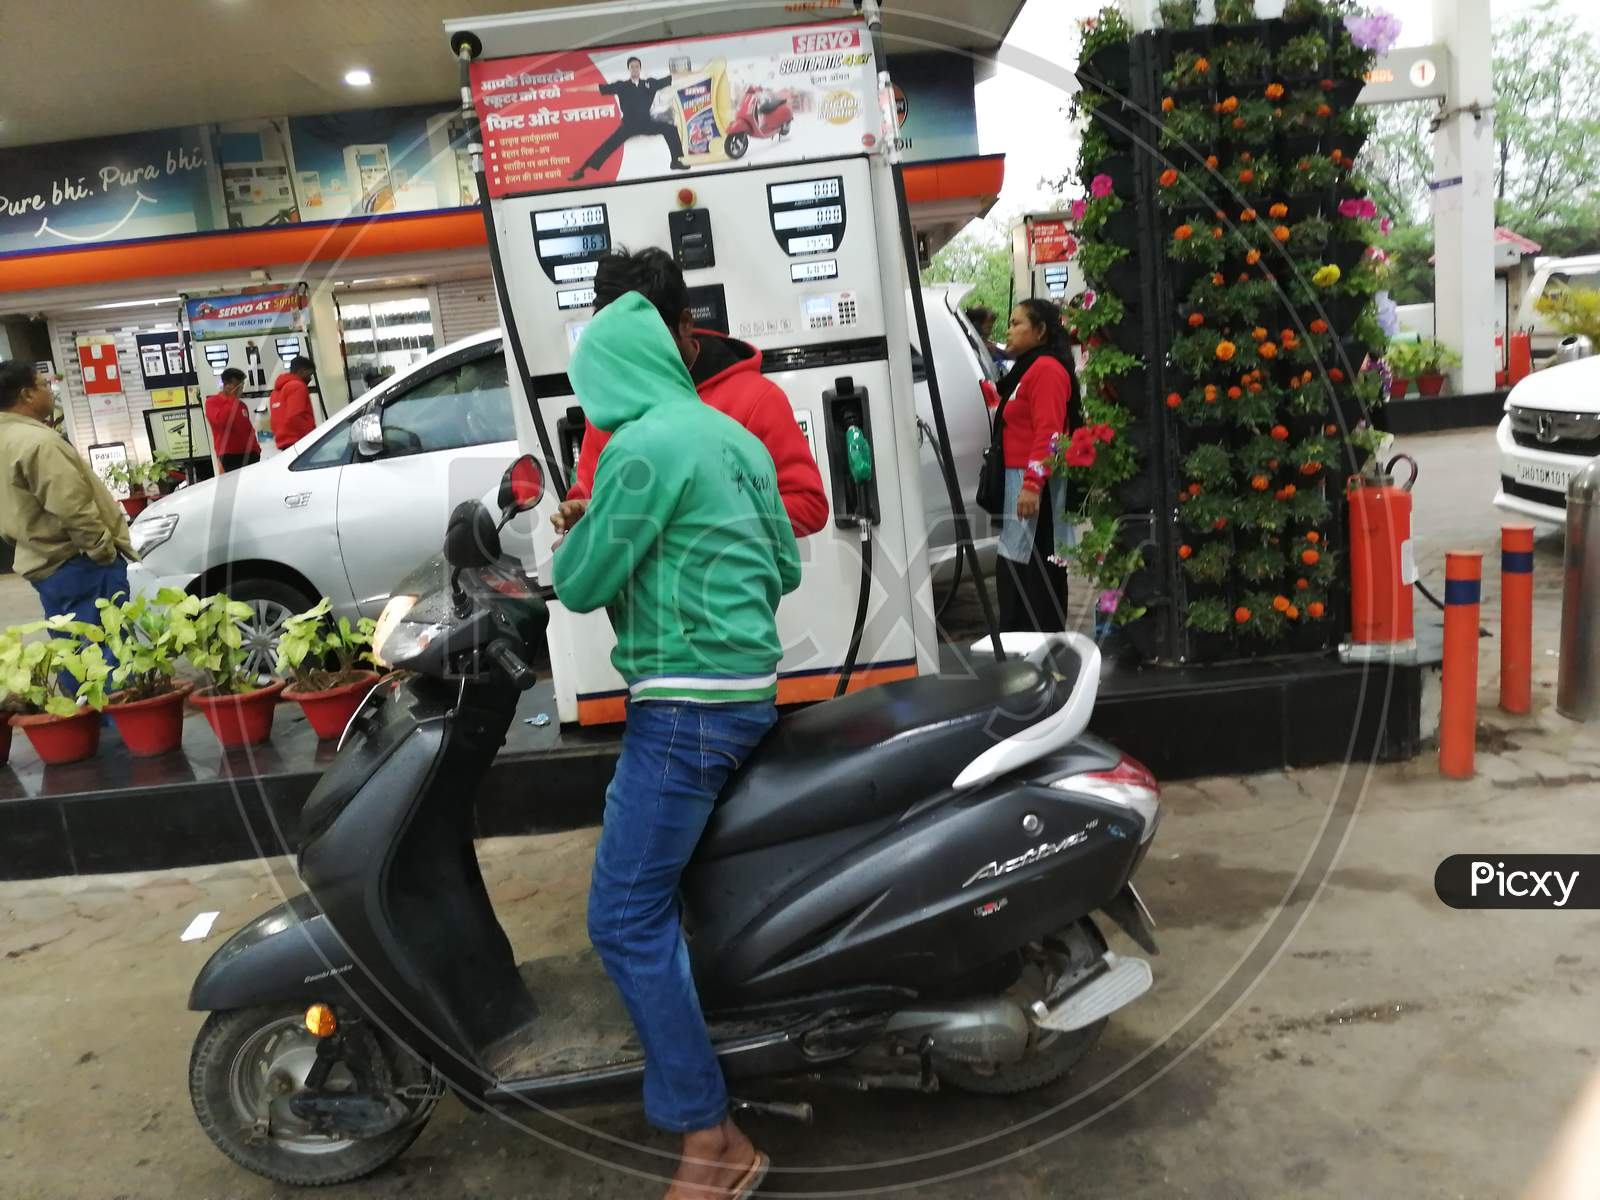 A man taking petrol from petrol station